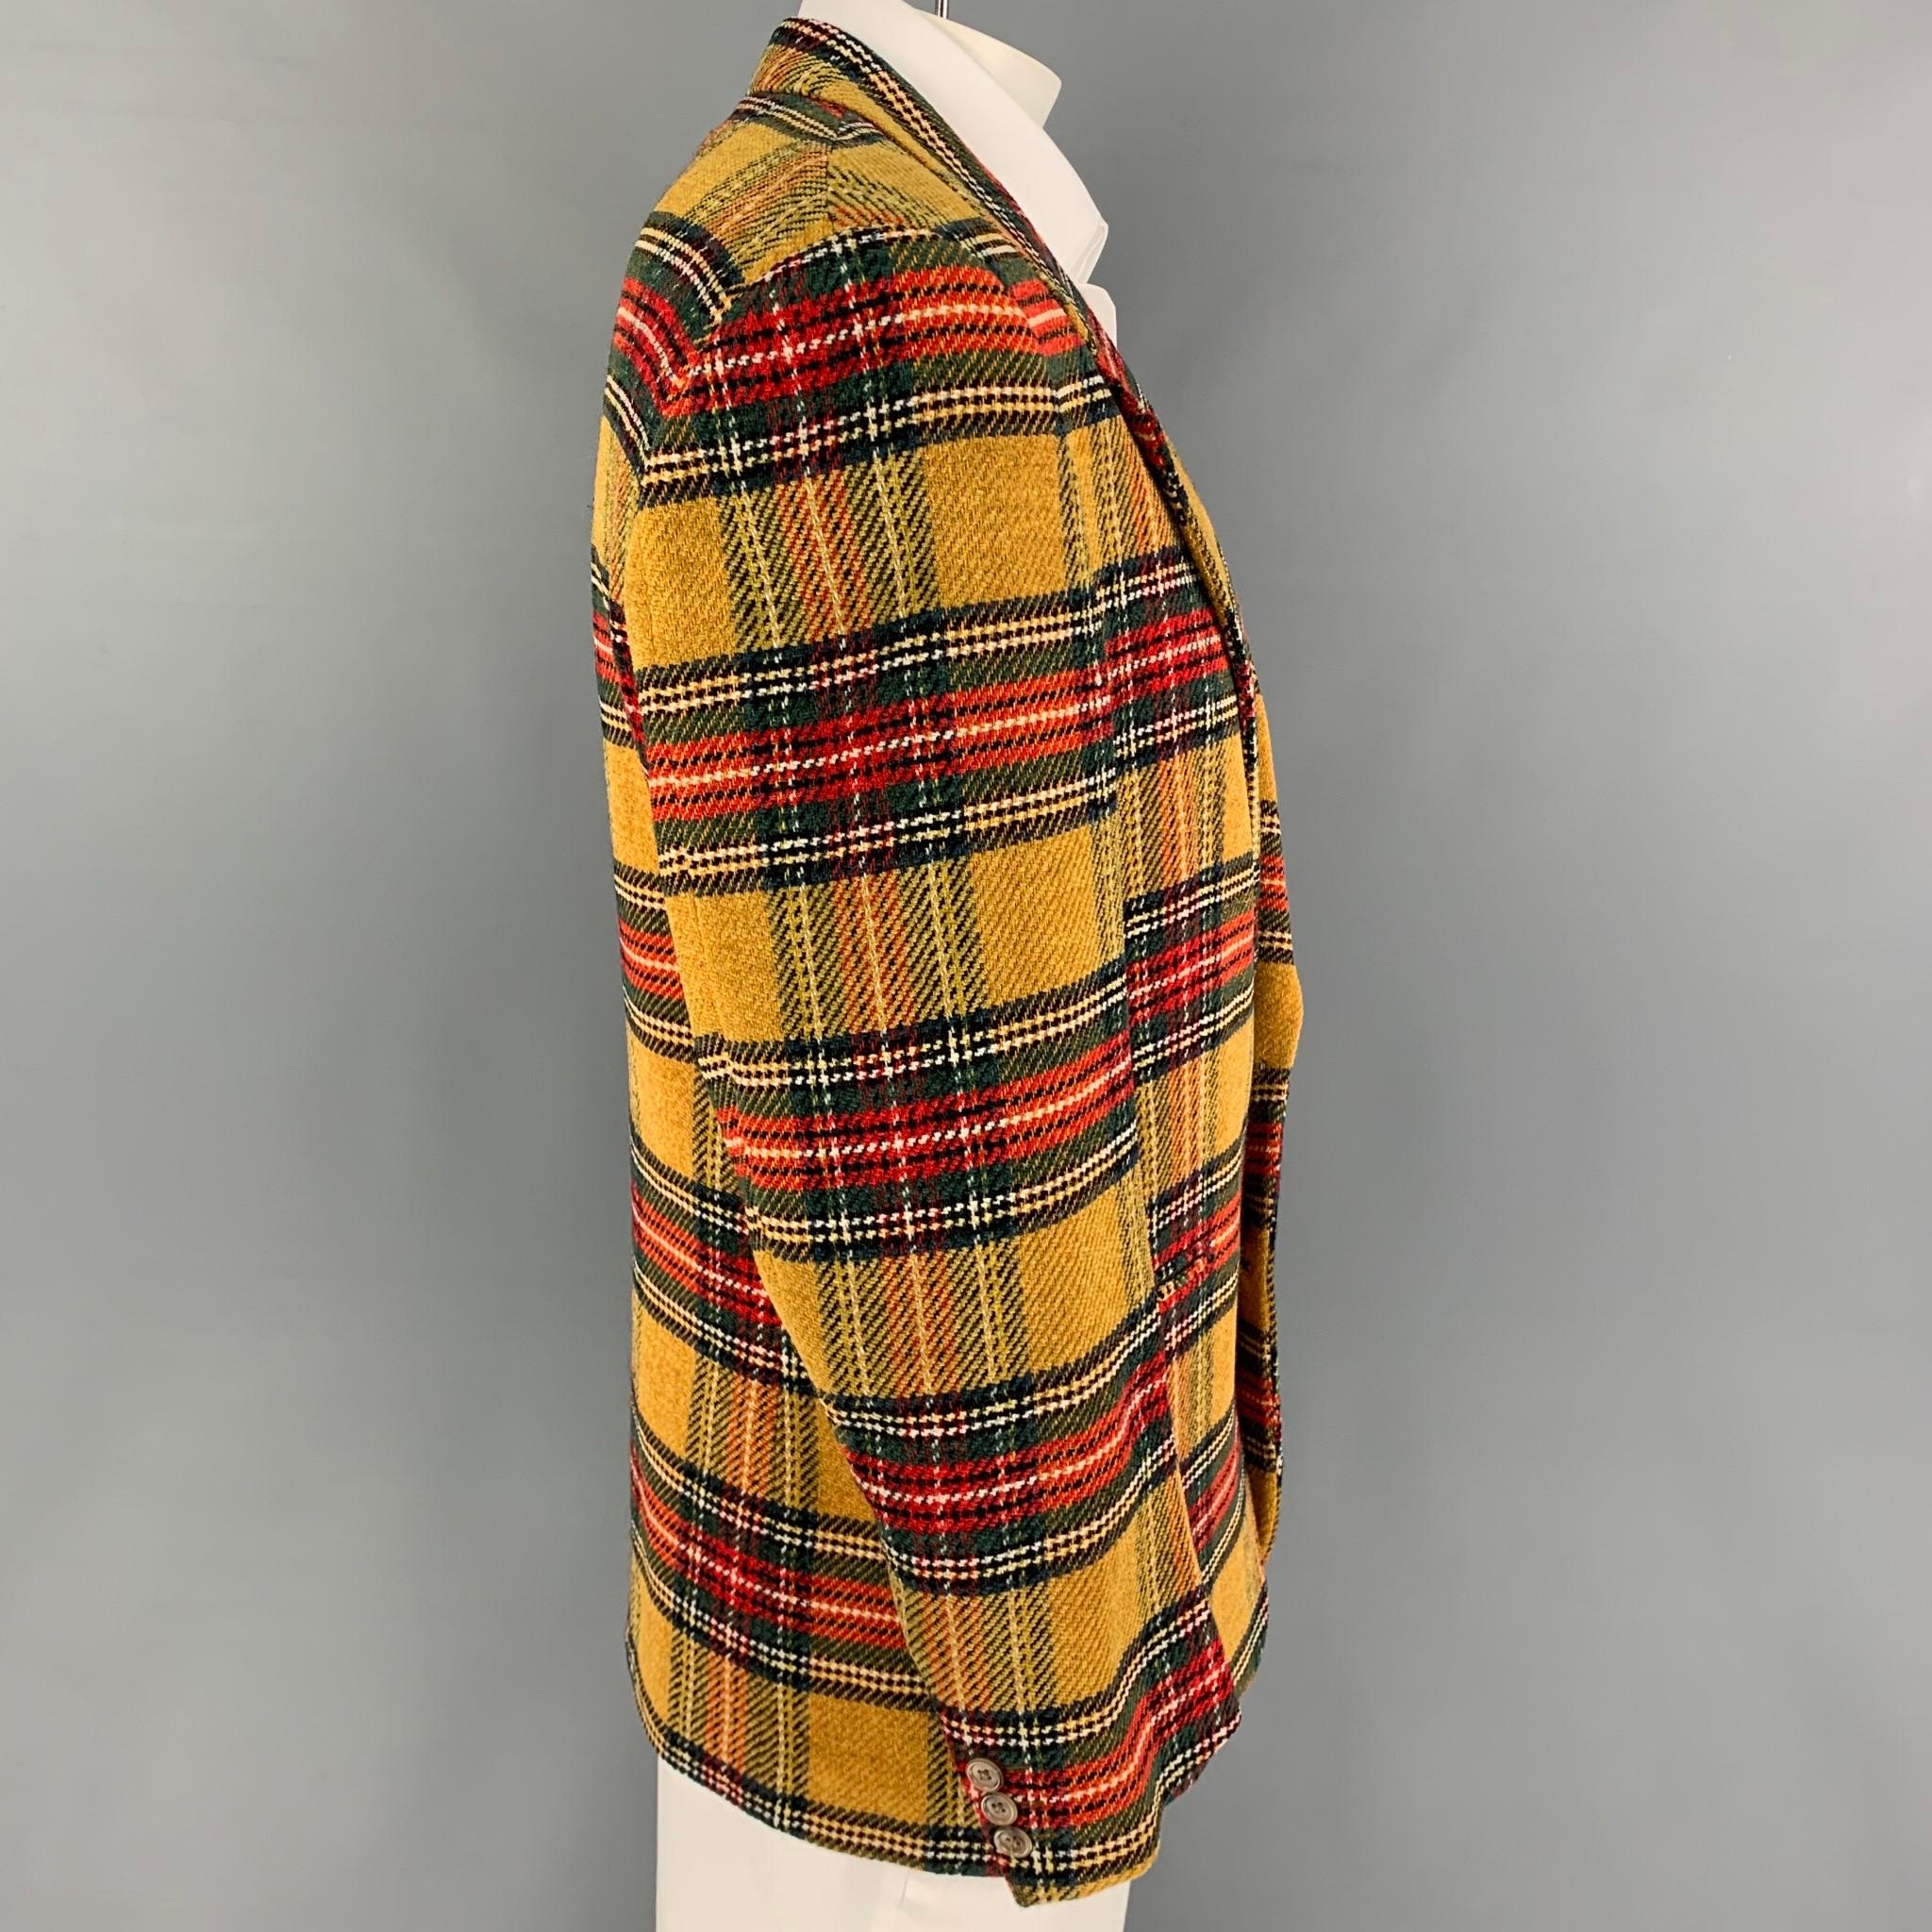 Vintage GIANFRANCO FERRE sport coat comes in a mustard & multi-color plaid wool with a full liner featuring a notch lapel, slit pockets, and a double button closure. Made in Italy. 

Very Good Pre-Owned Condition.
Marked: Marked IT 50 but fits like